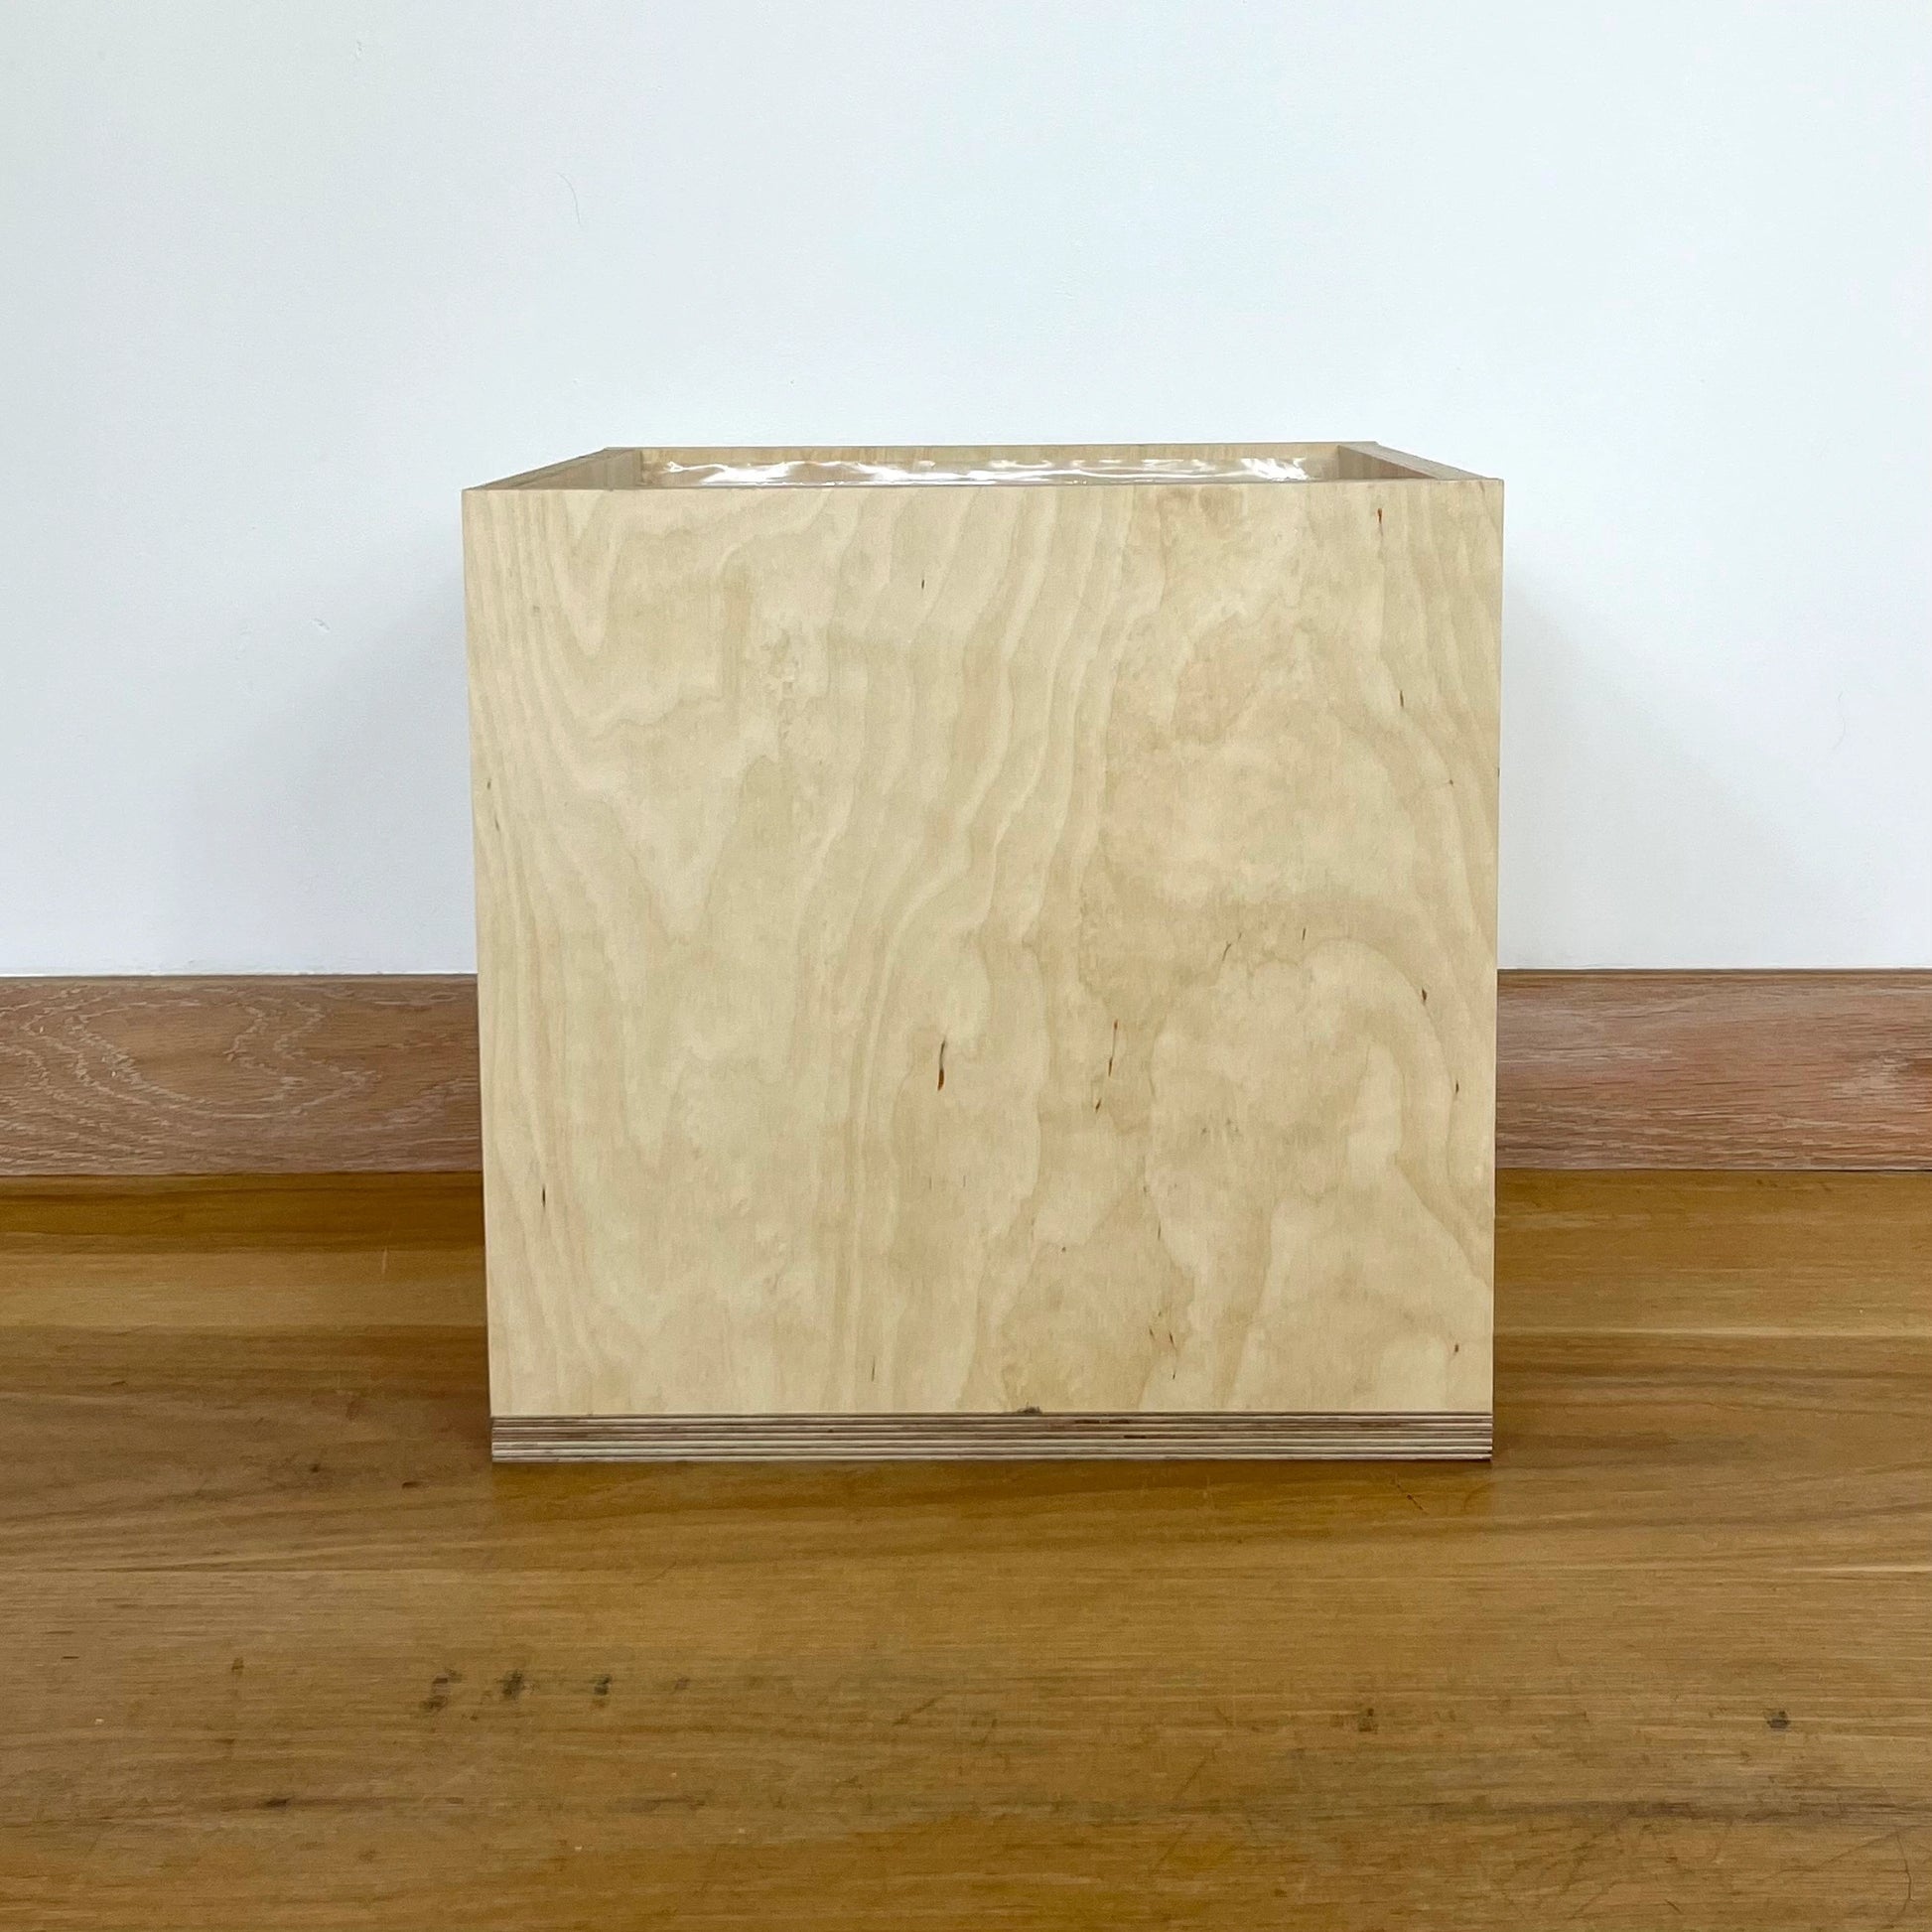 Simple pale wood storage box sits facing front on wooden floor.